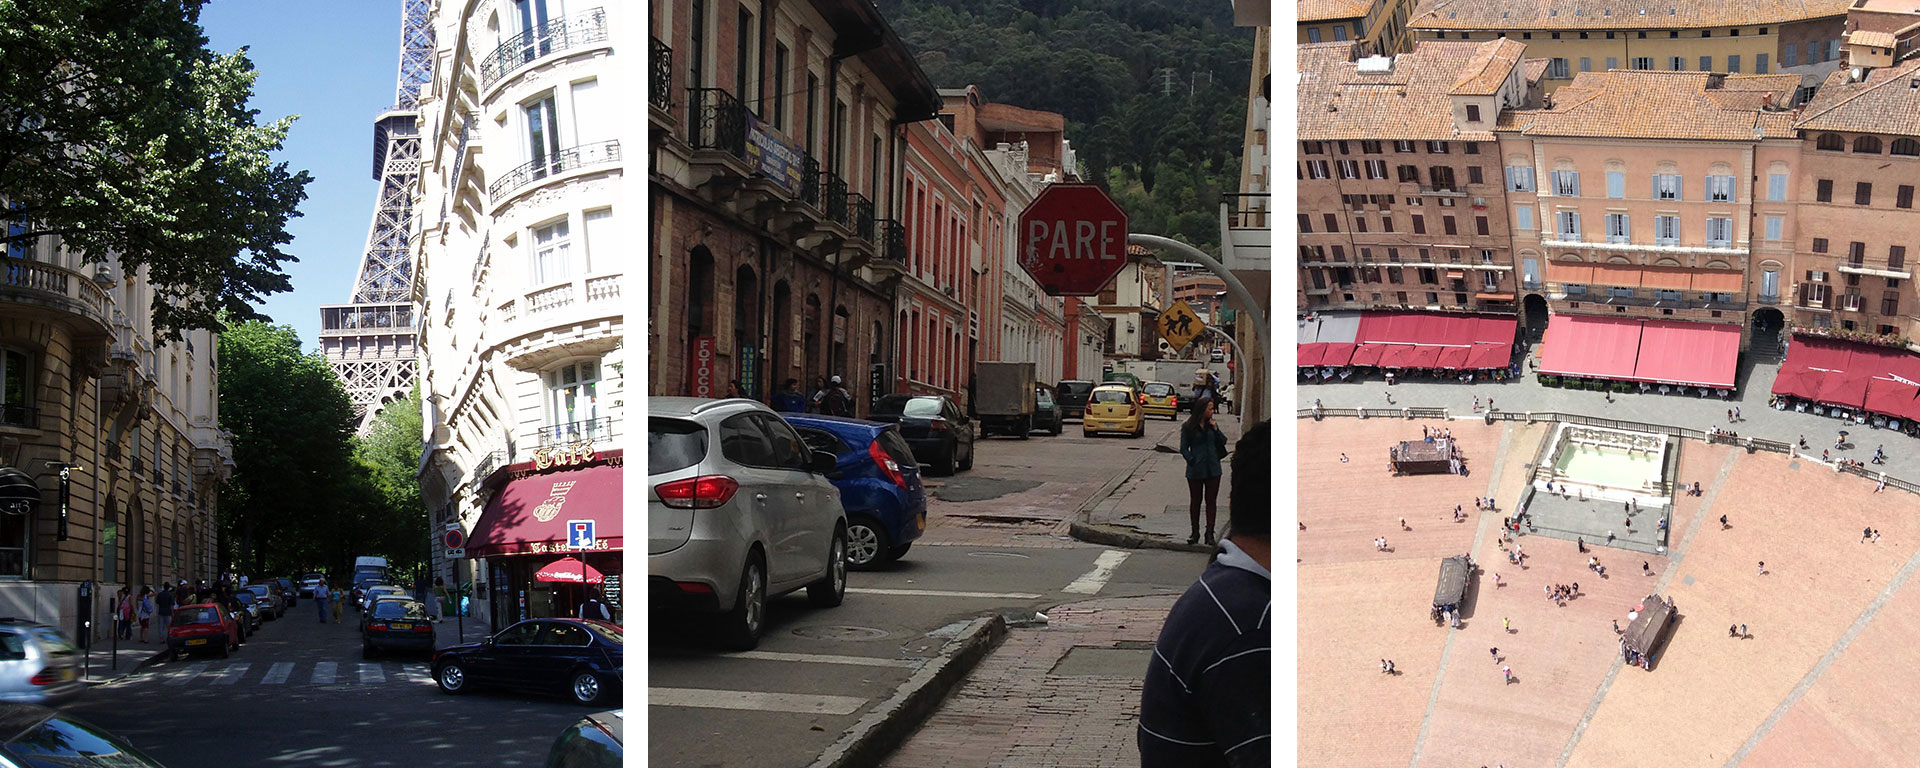 Three photos: A street in Paris, a street in Bogotá, Colombia, and an aerial view of a plaza in Siena, Italy